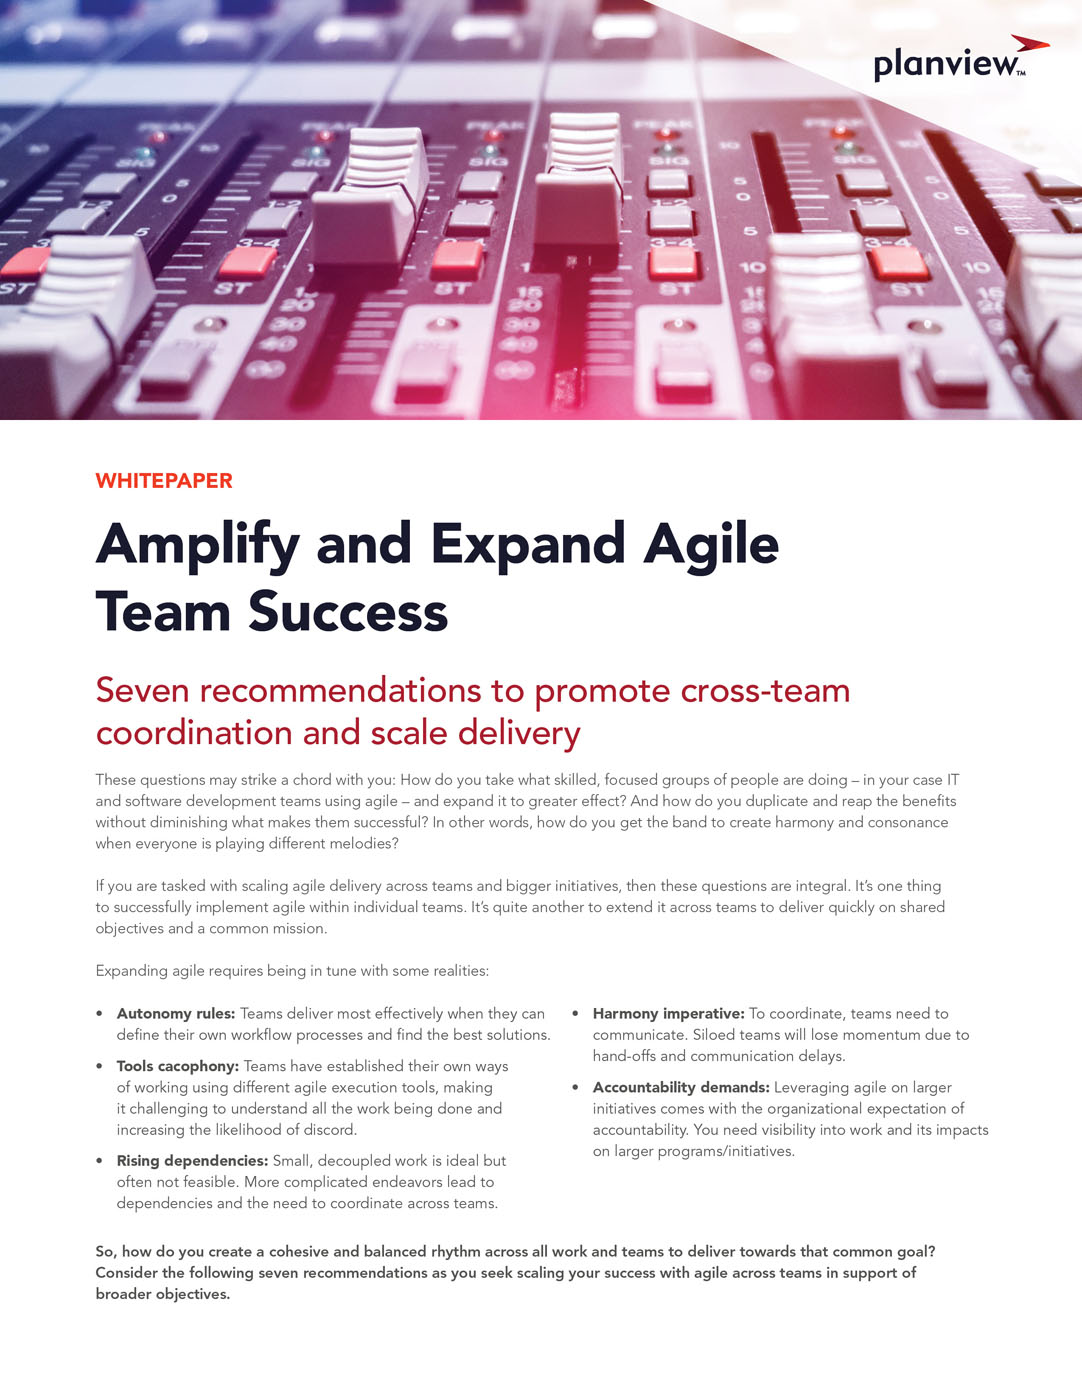 Amplify and Expand Agile Team Success